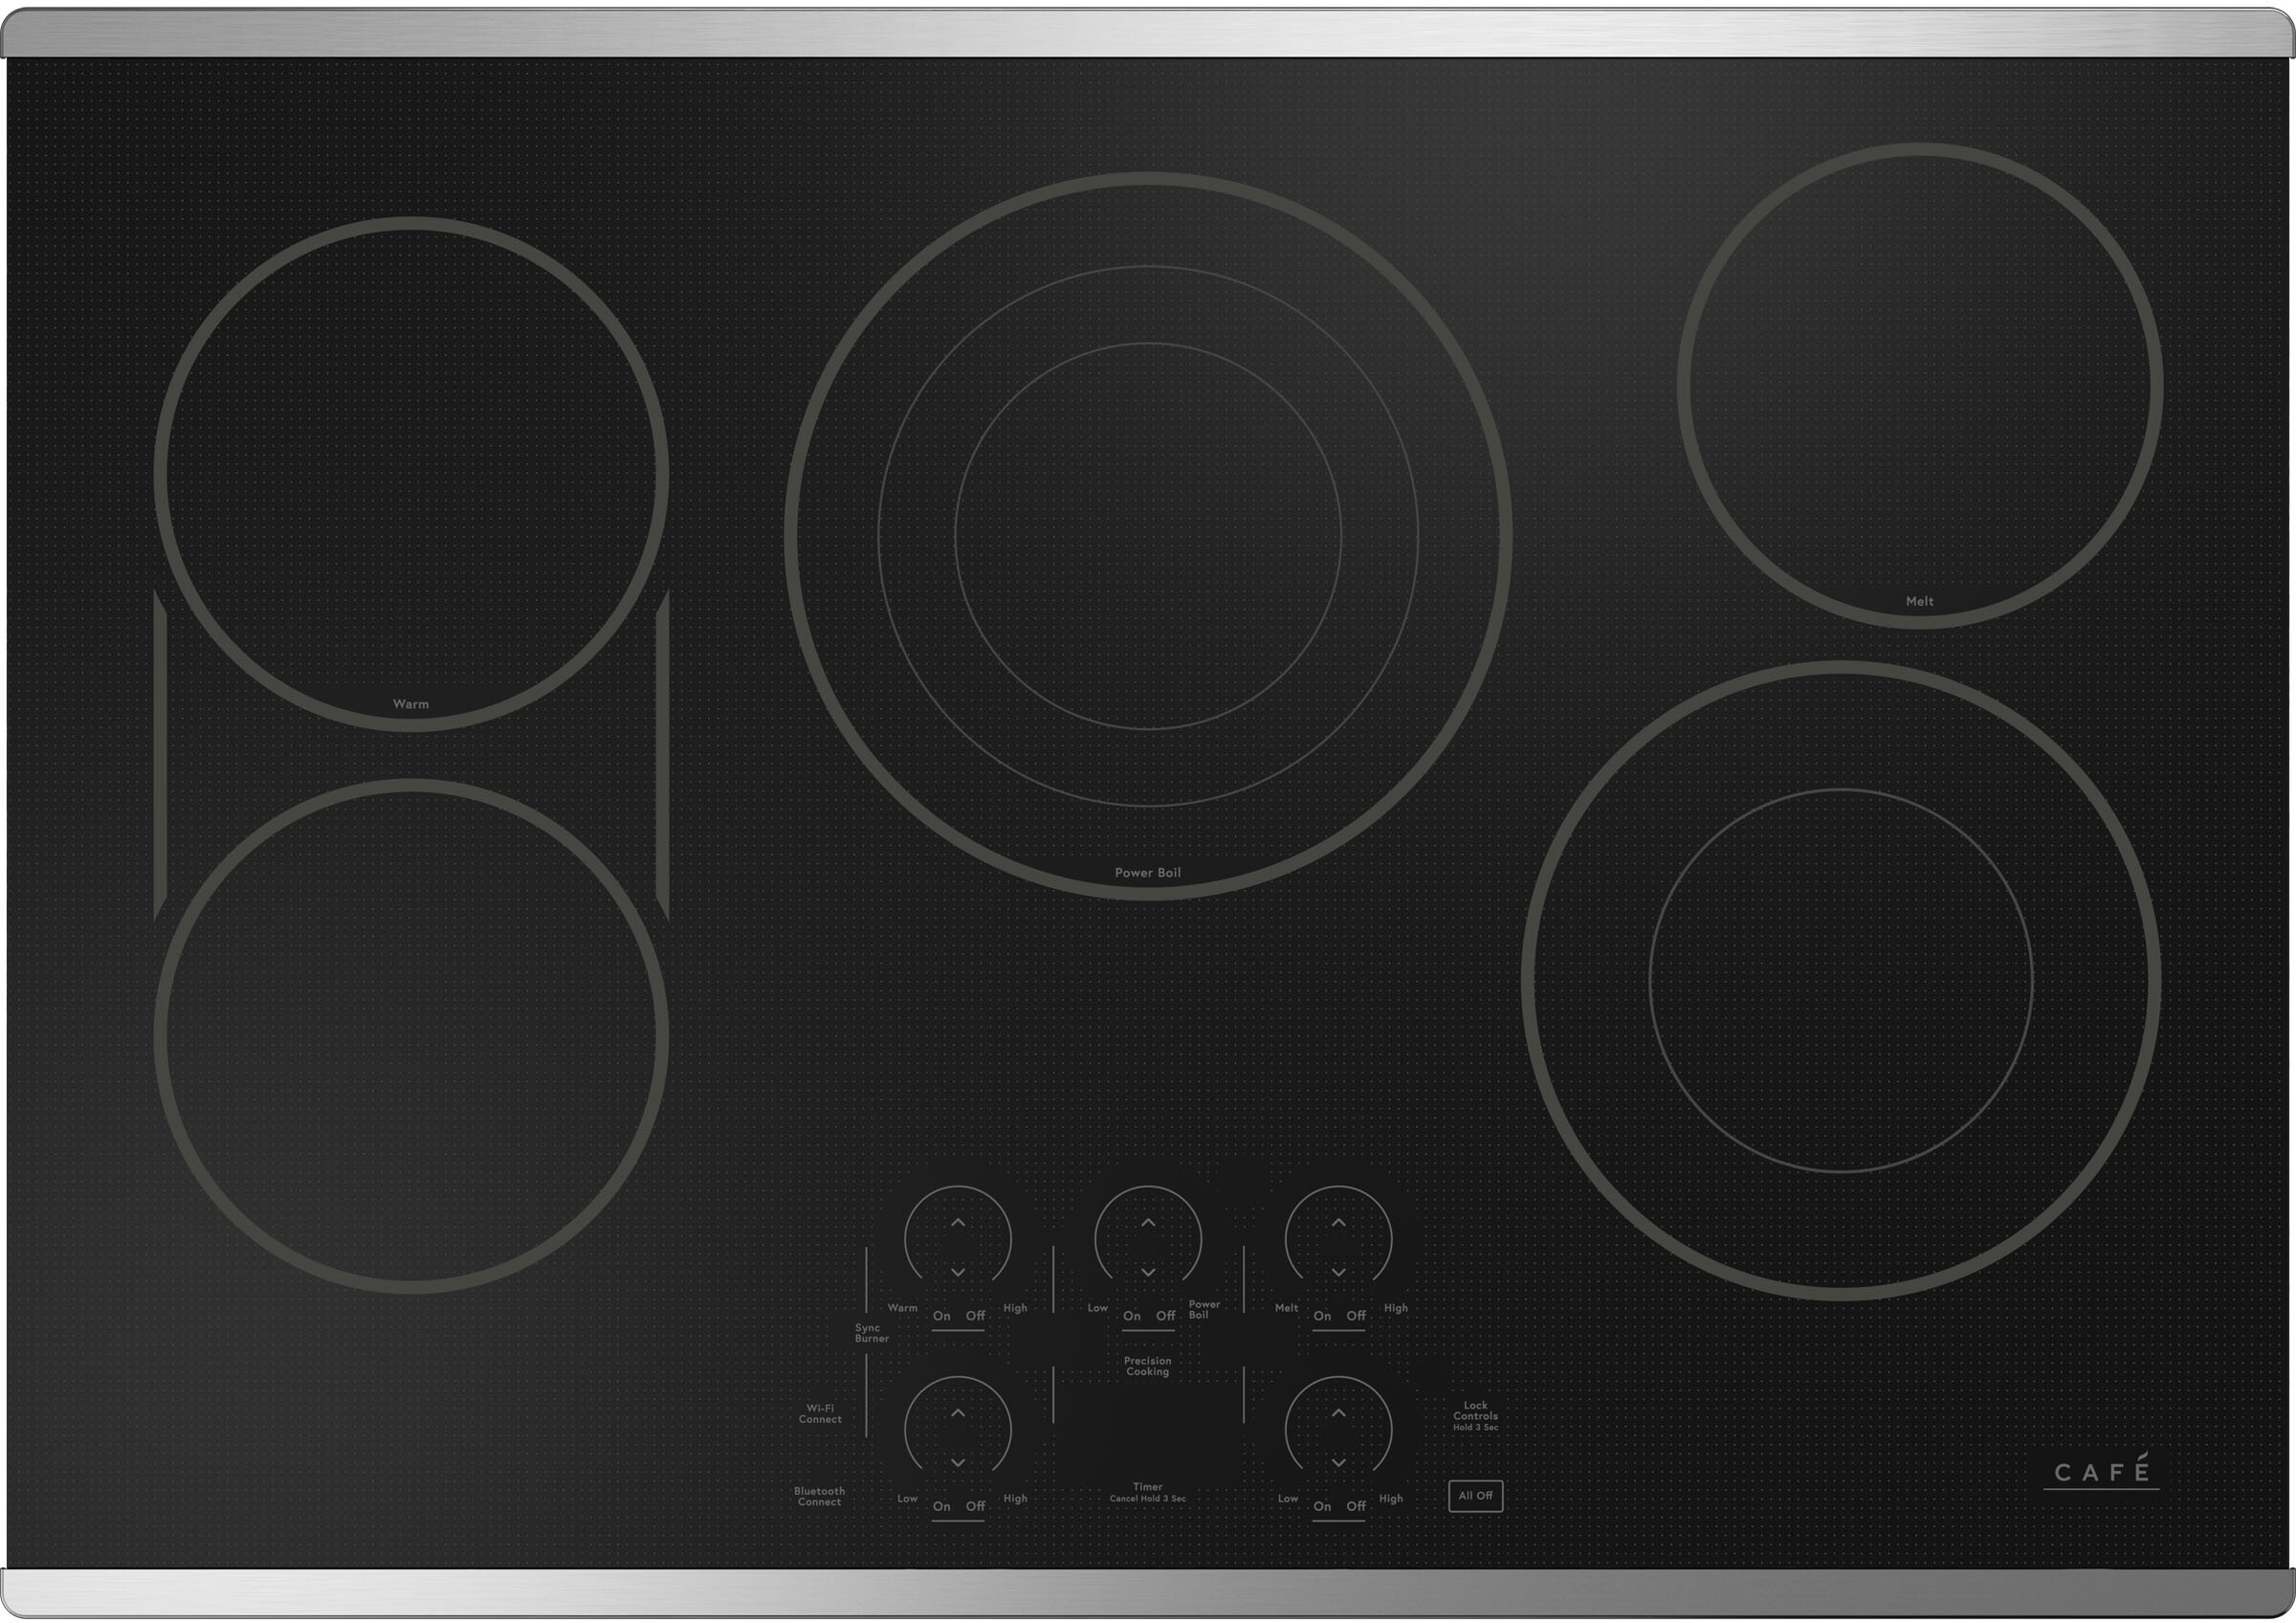 30"" Electric Drop-In Cooktop - Cafe CEP90302TSS